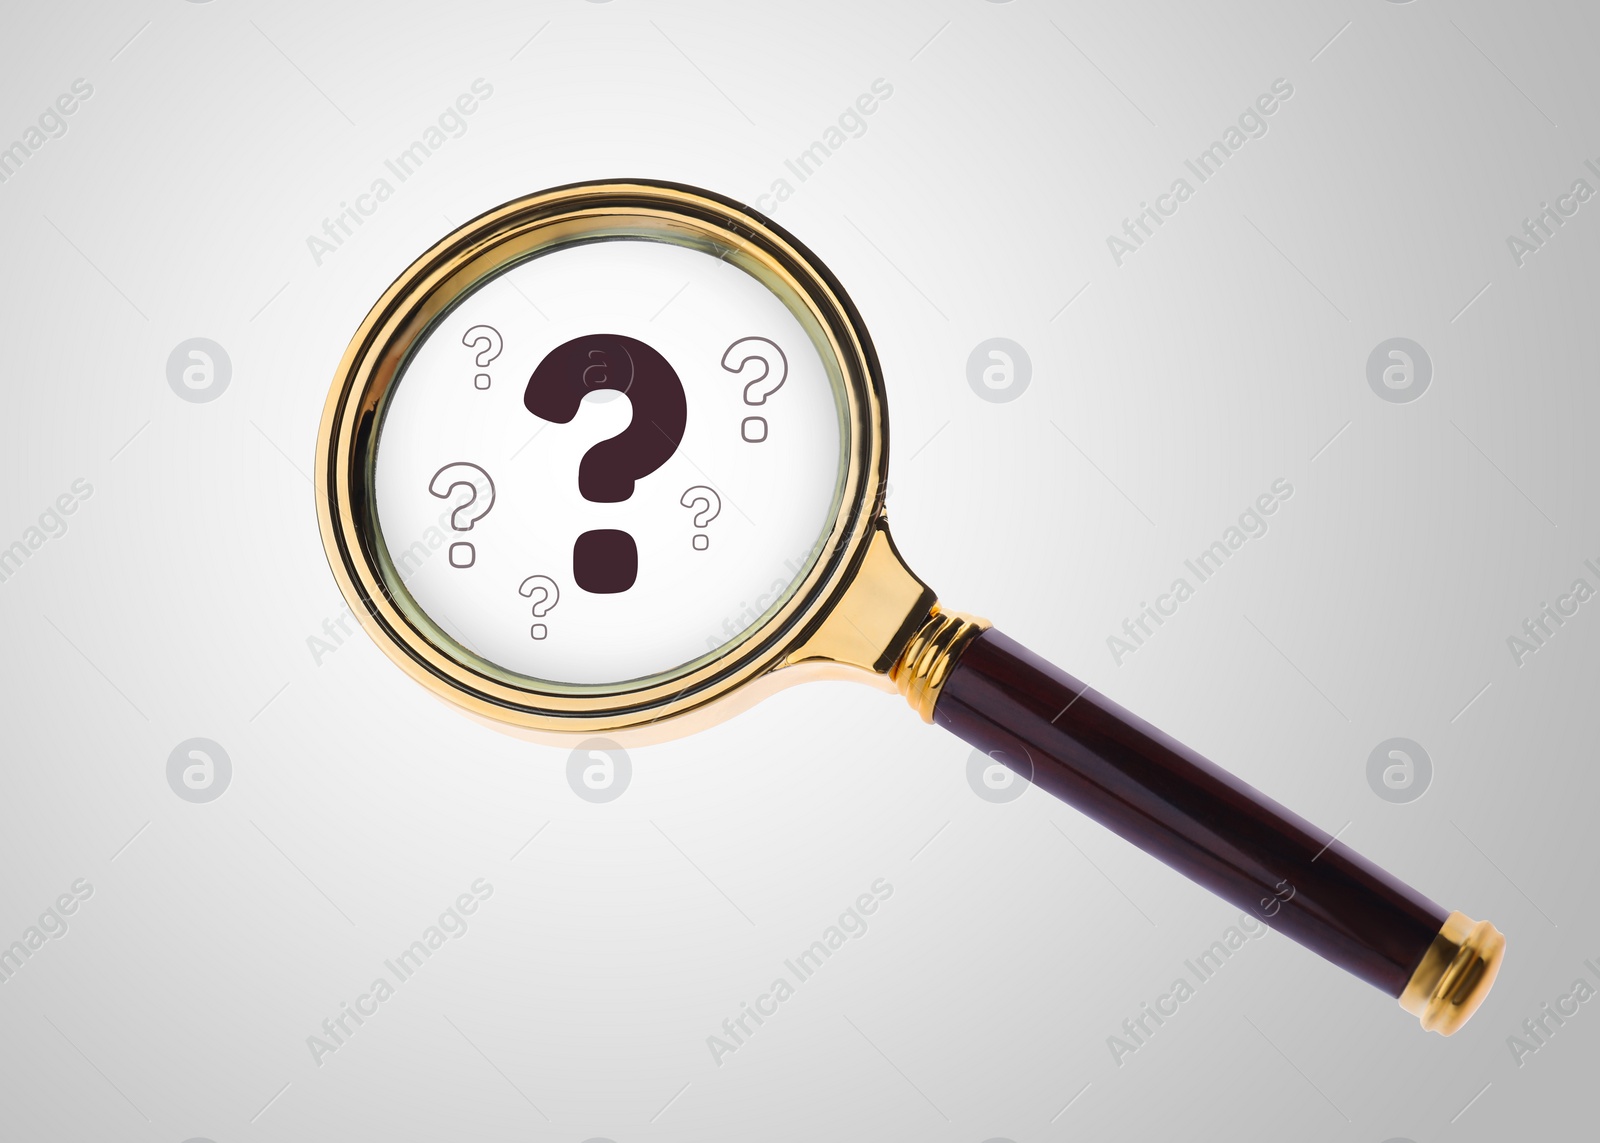 Image of Question marks on light background, view through magnifying glass